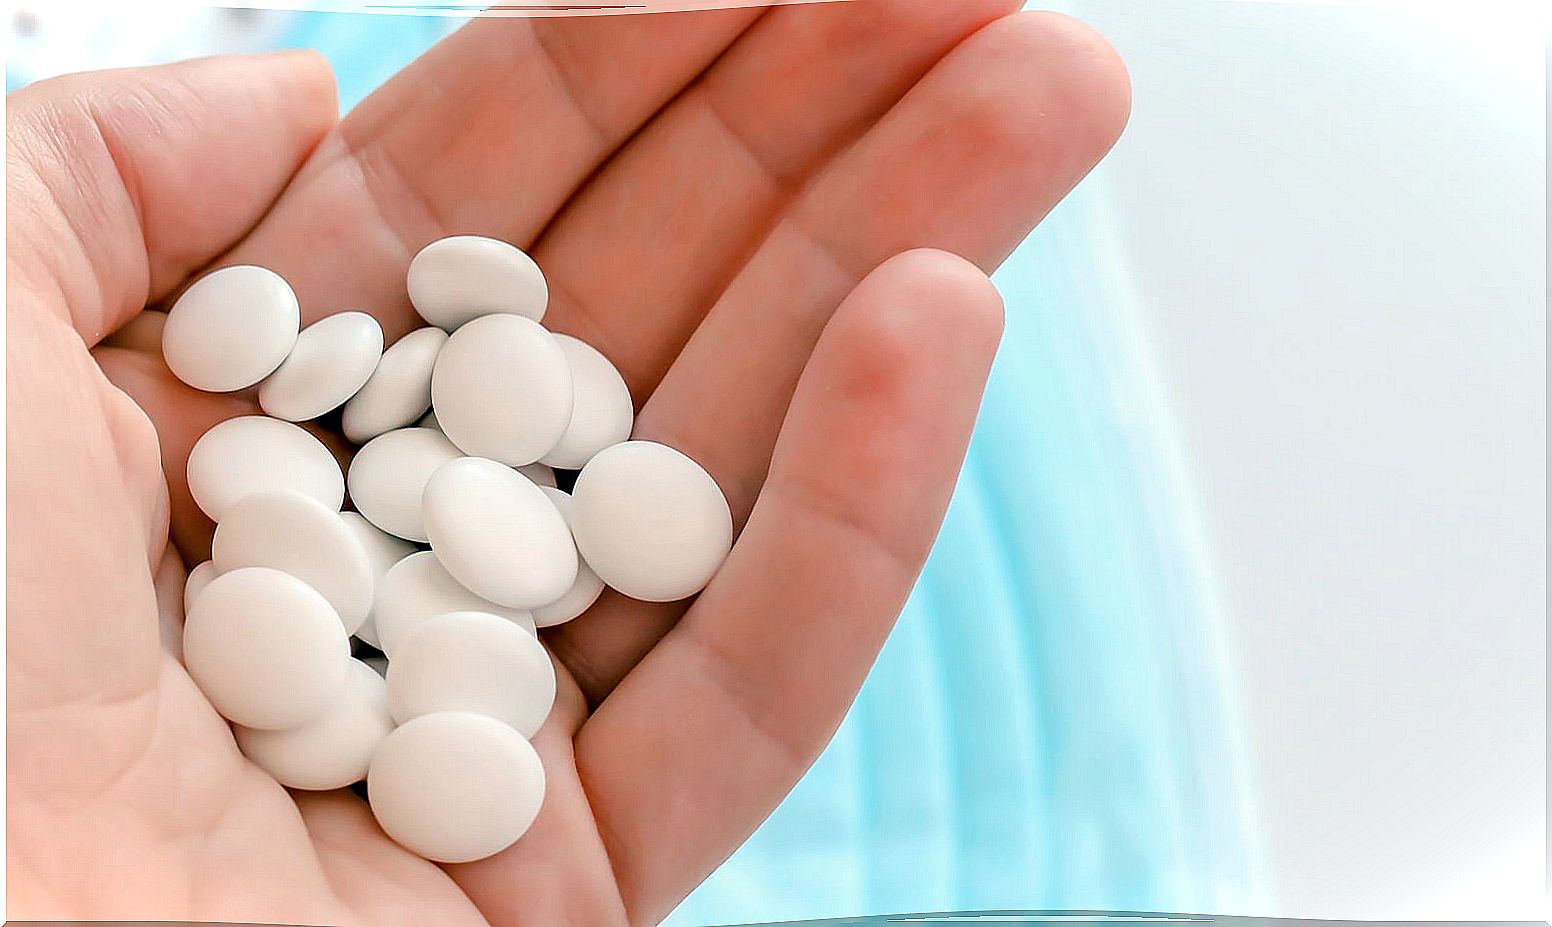 5 things to remember if you take antidepressants